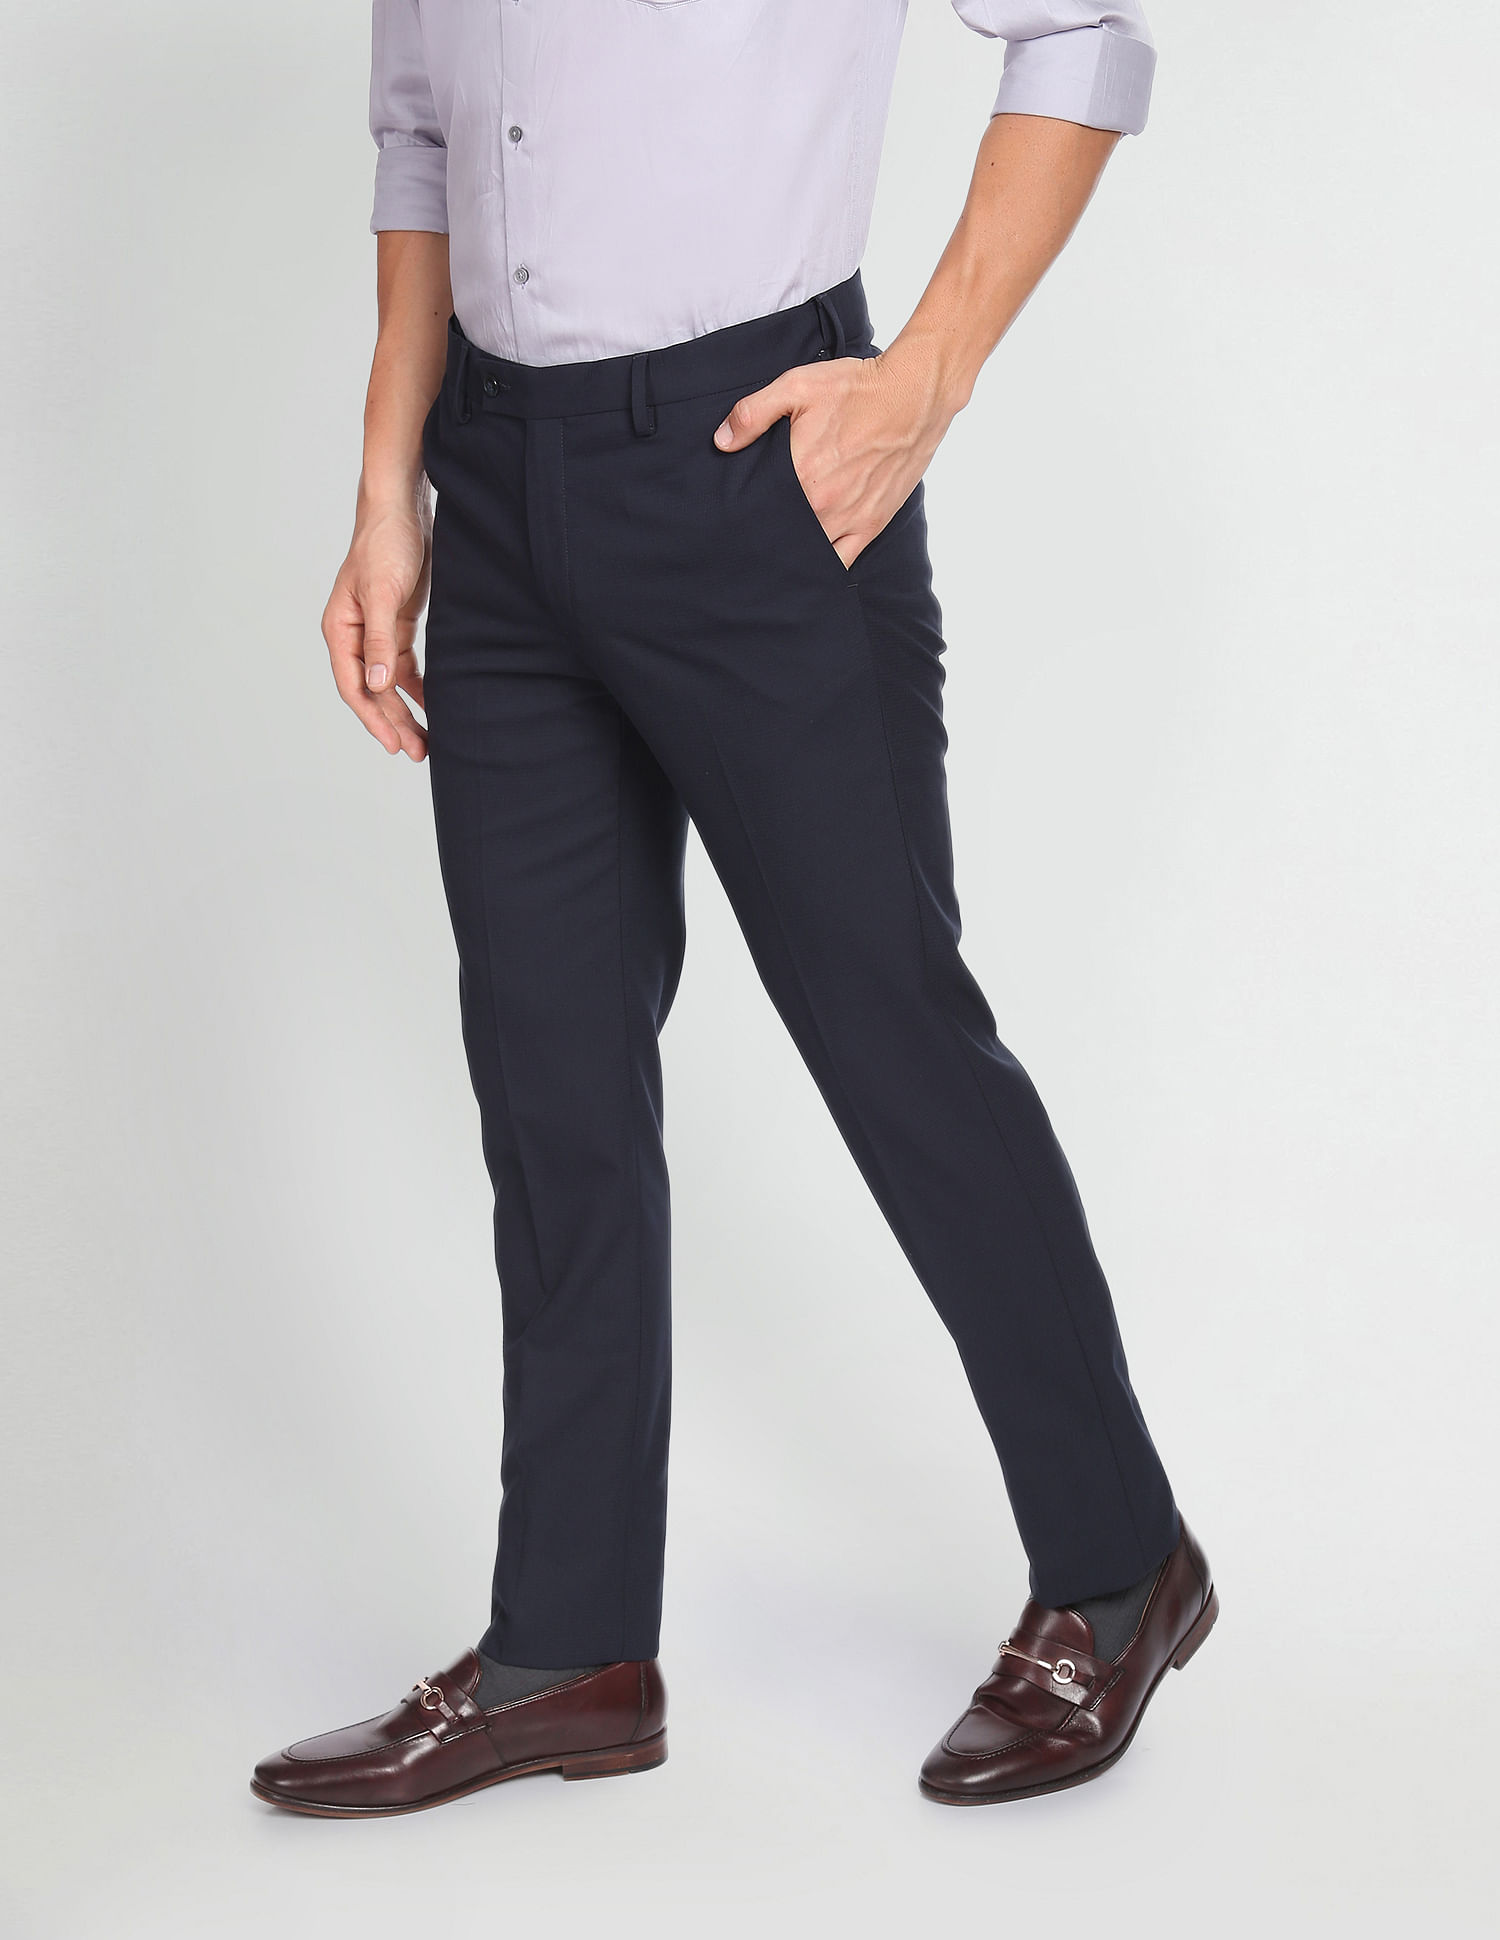 Mens Formal Pants In Patna - Prices, Manufacturers & Suppliers